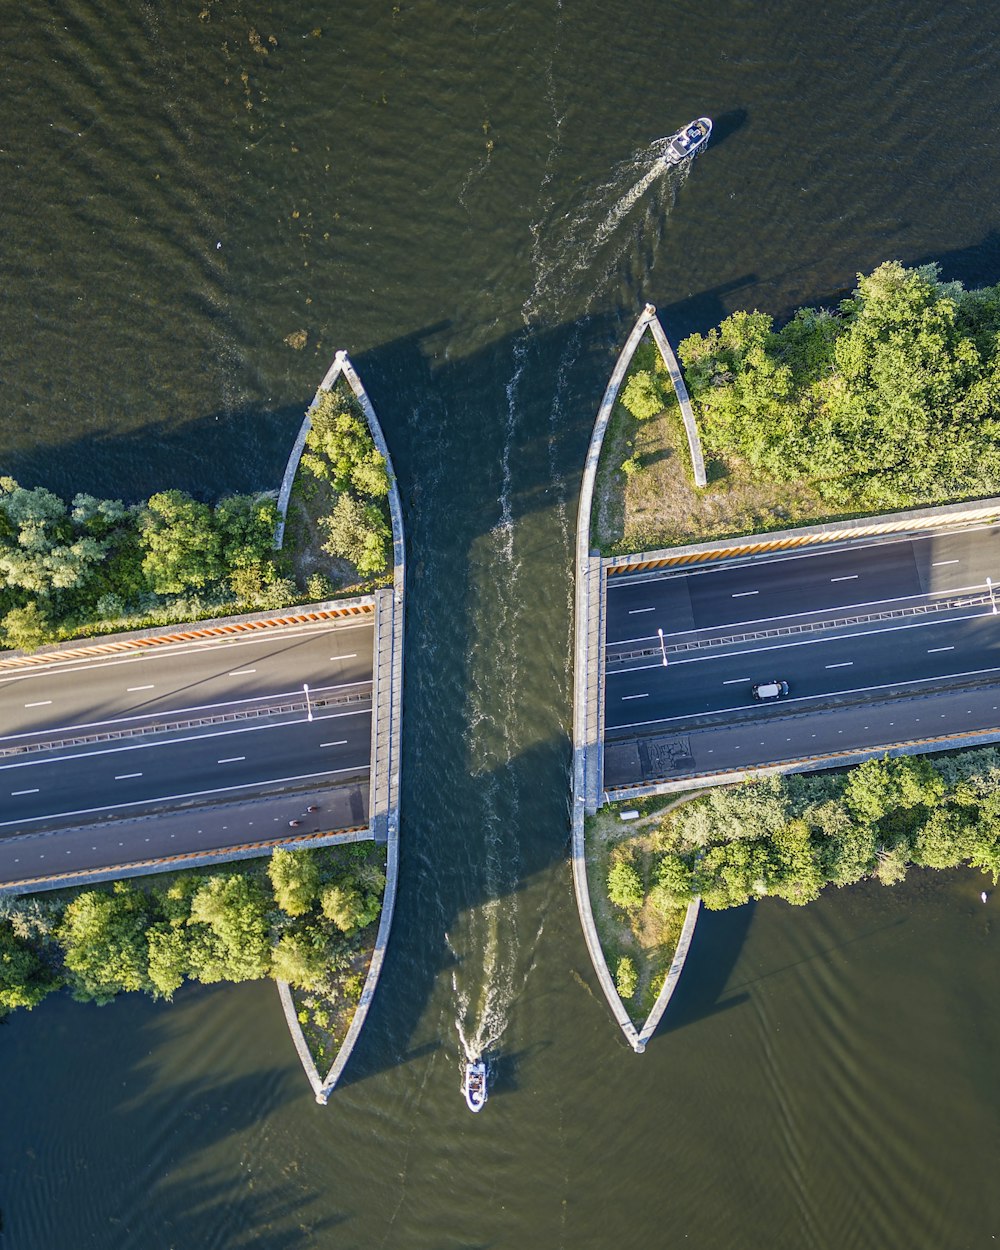 an aerial view of two boats on a river